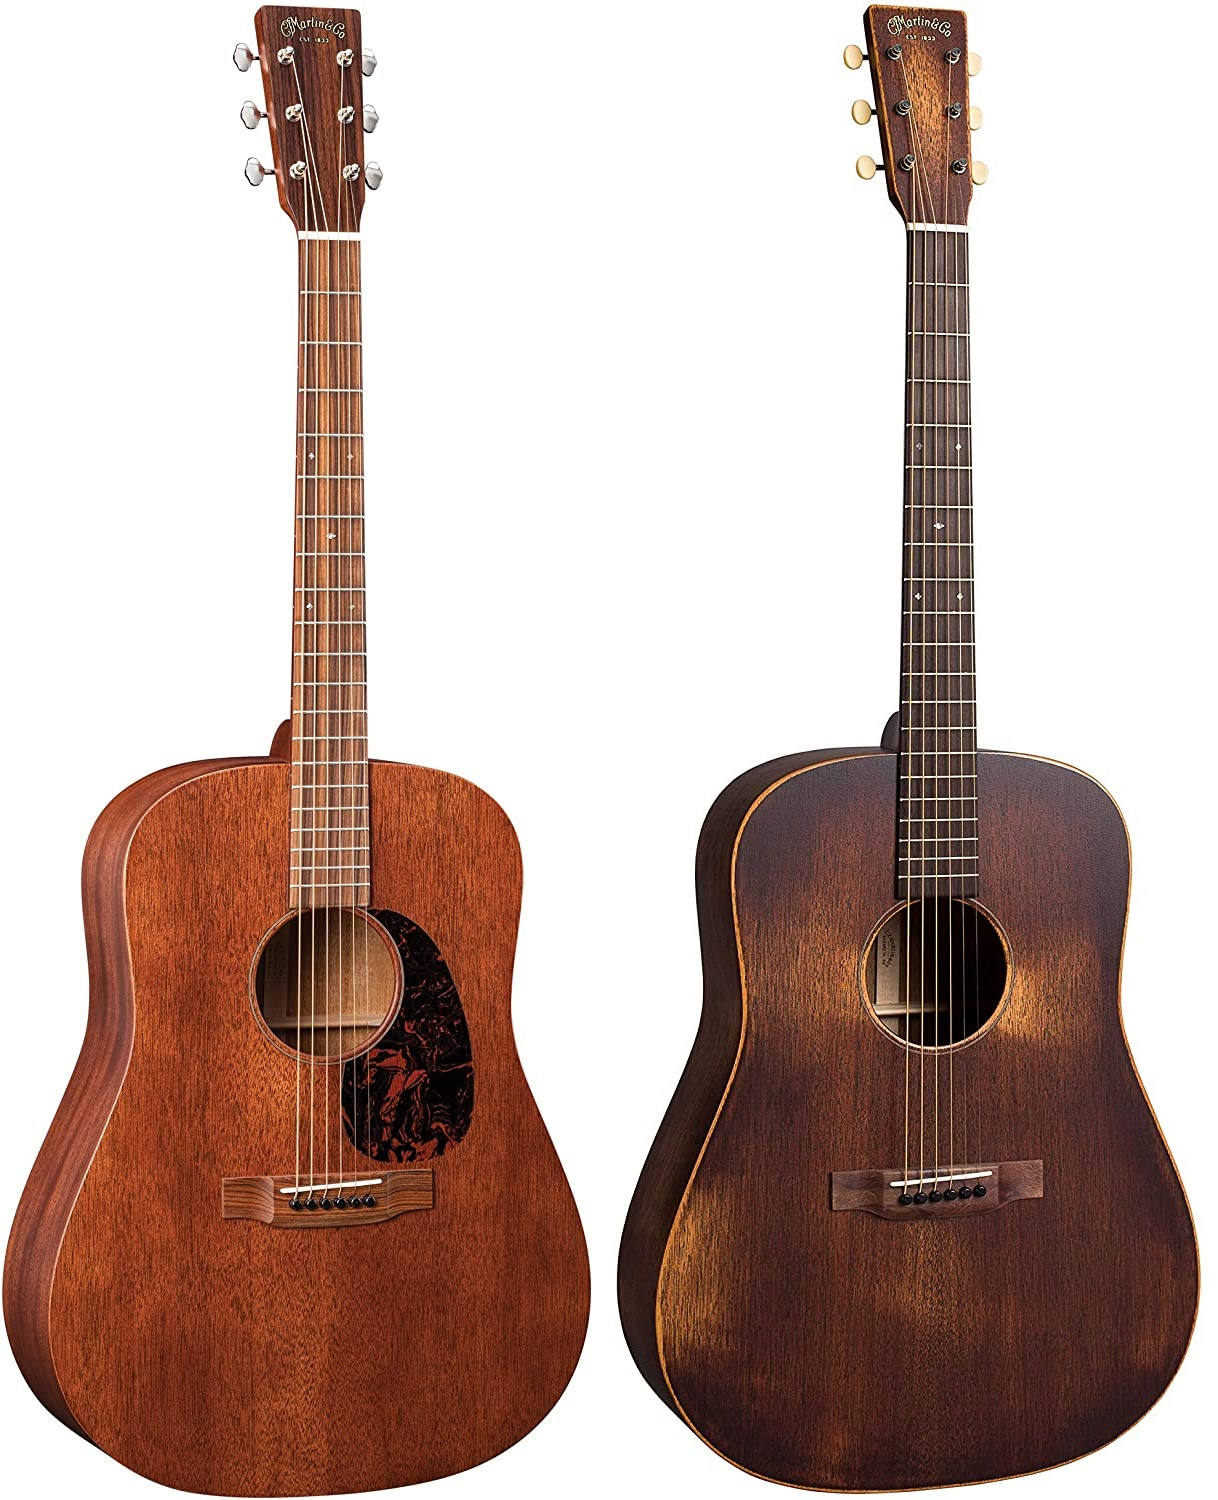 Martin D-15M colors available